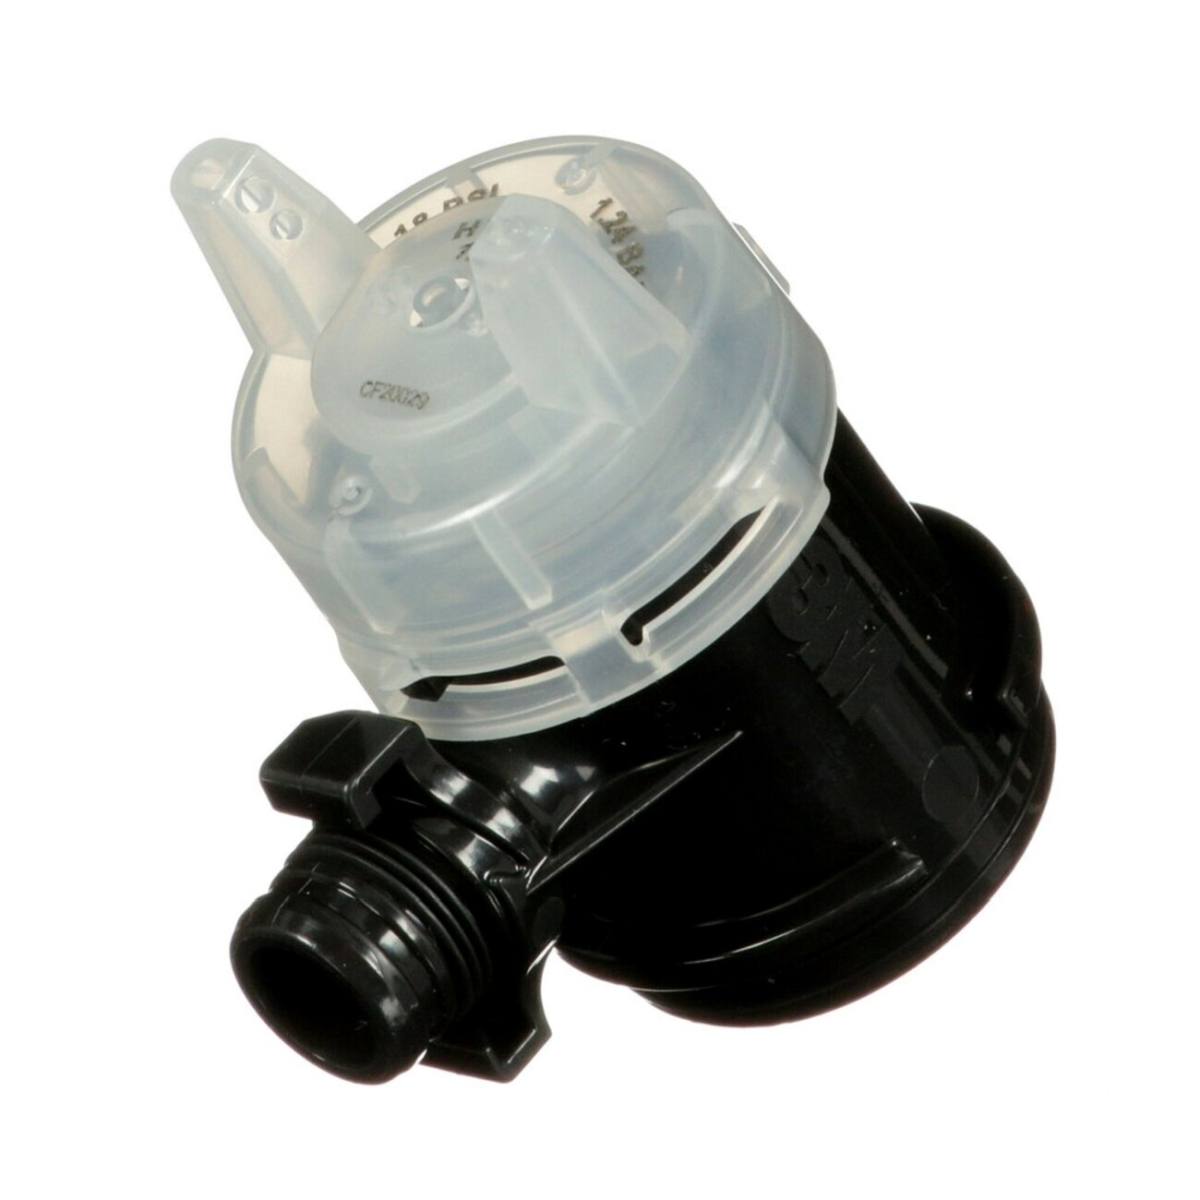 3M High Performance Nozzle Head for Pressure Cups Performance Pressure HVLP Atomizing Head Refill Kit 26818, Clear, 1.8 (Pack=5pcs)